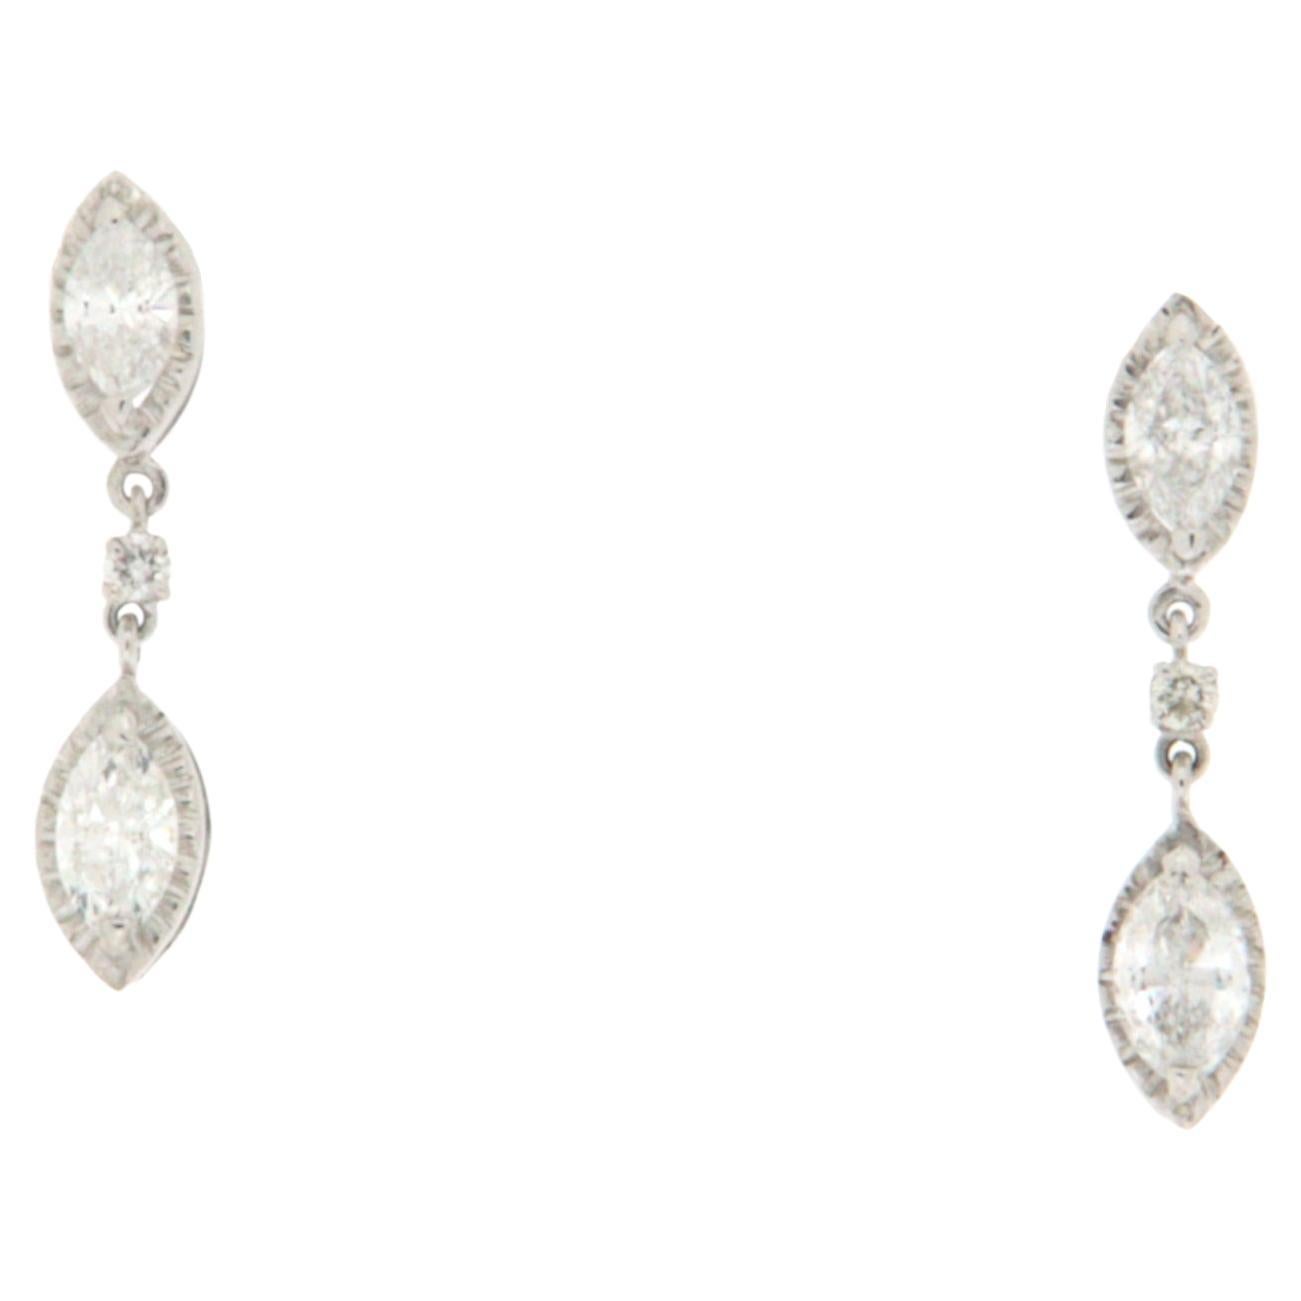 Handcraft Diamonds Marquise 18 Carats White Gold Drop Earrings